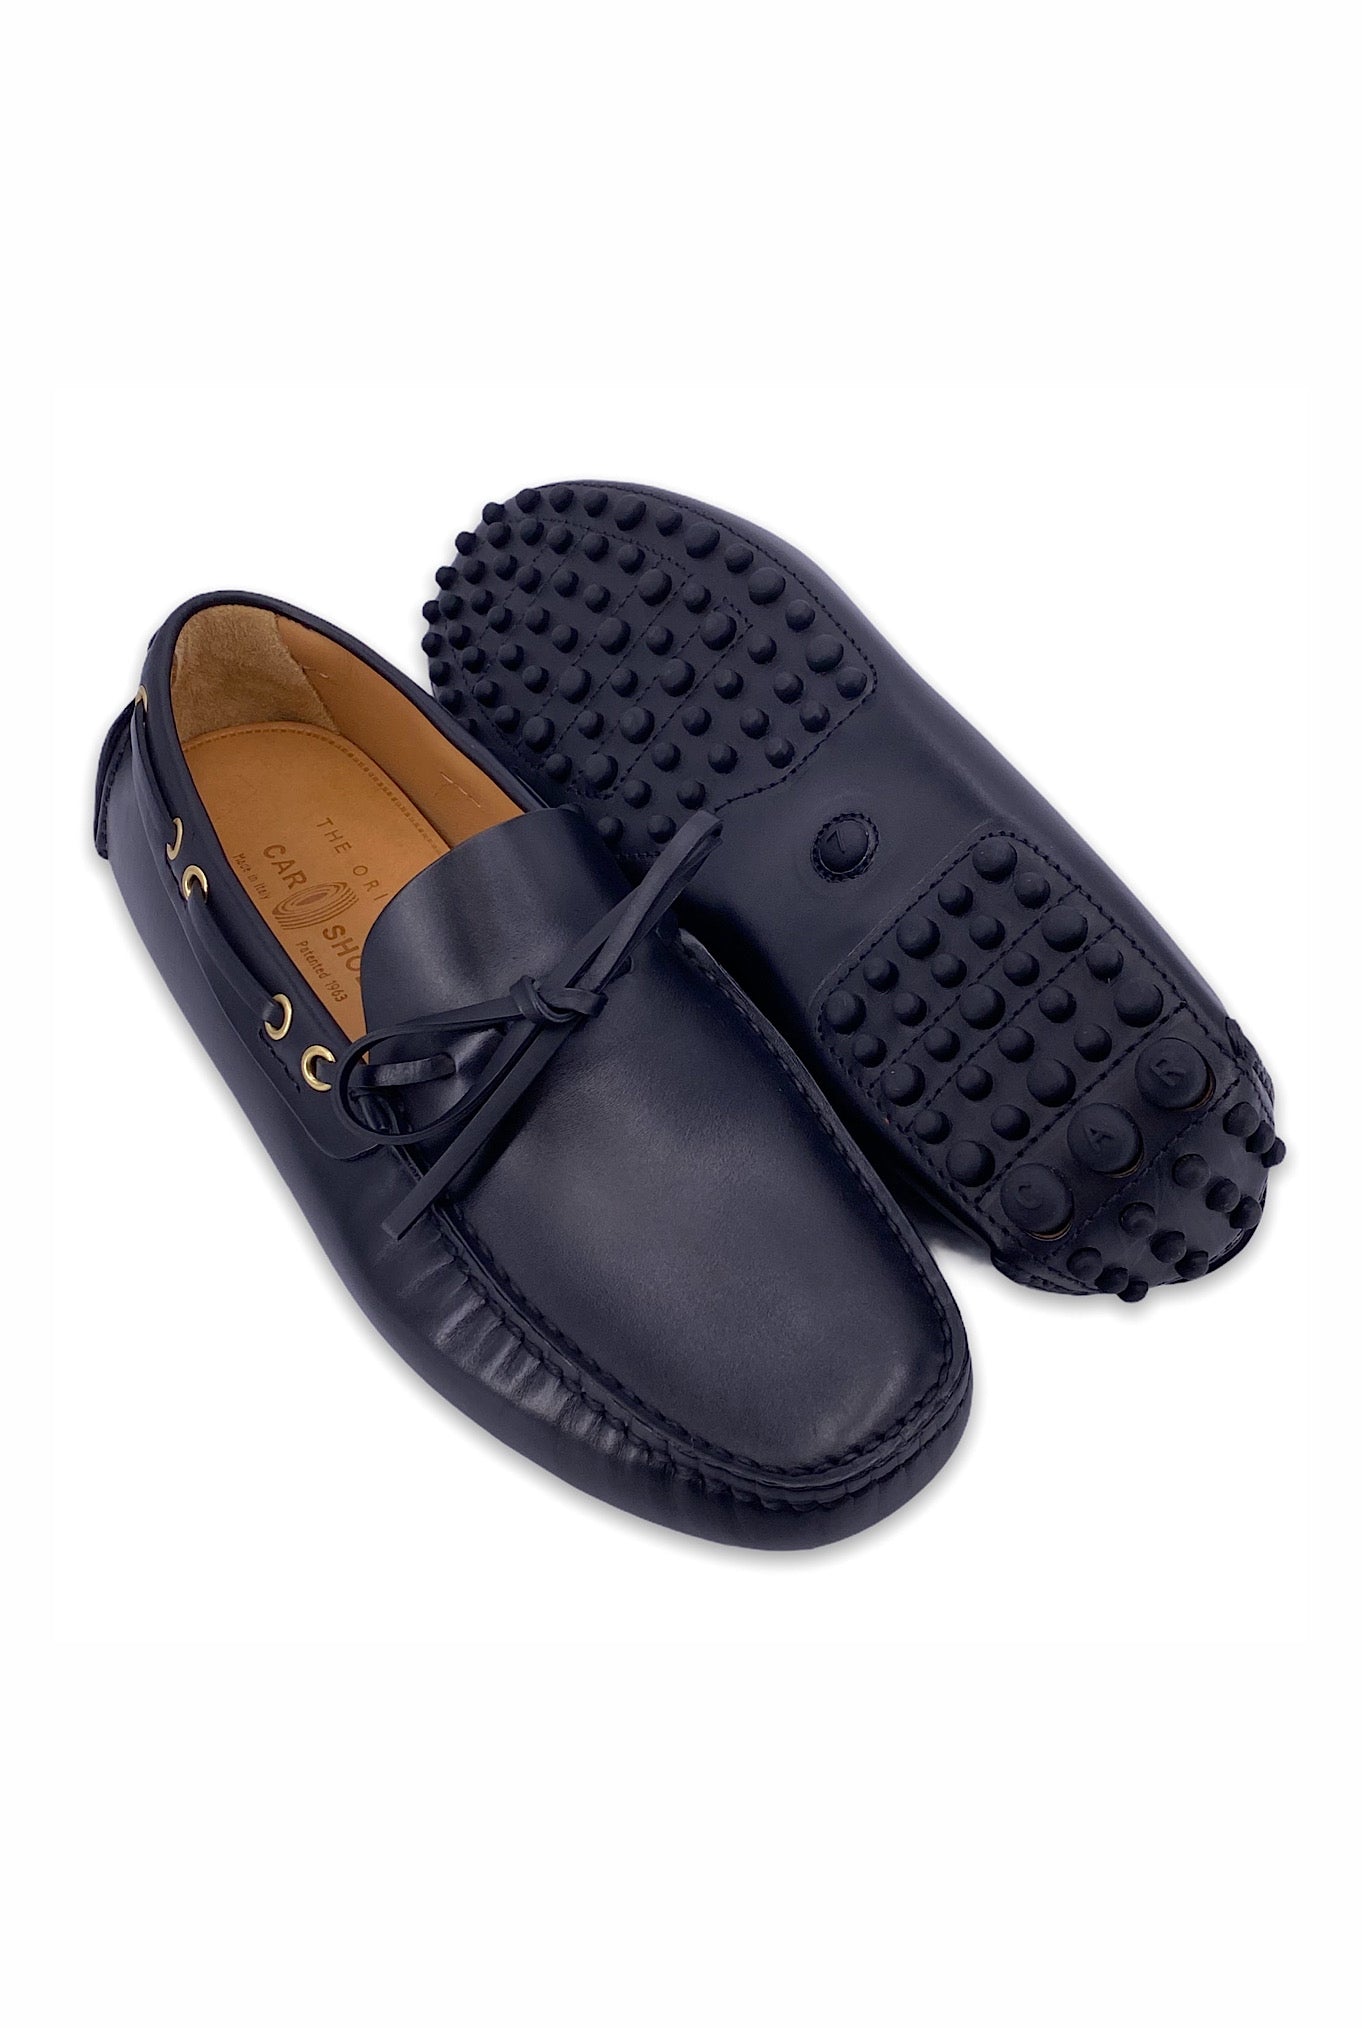 CAR SHOE Moccasin in Black Leather